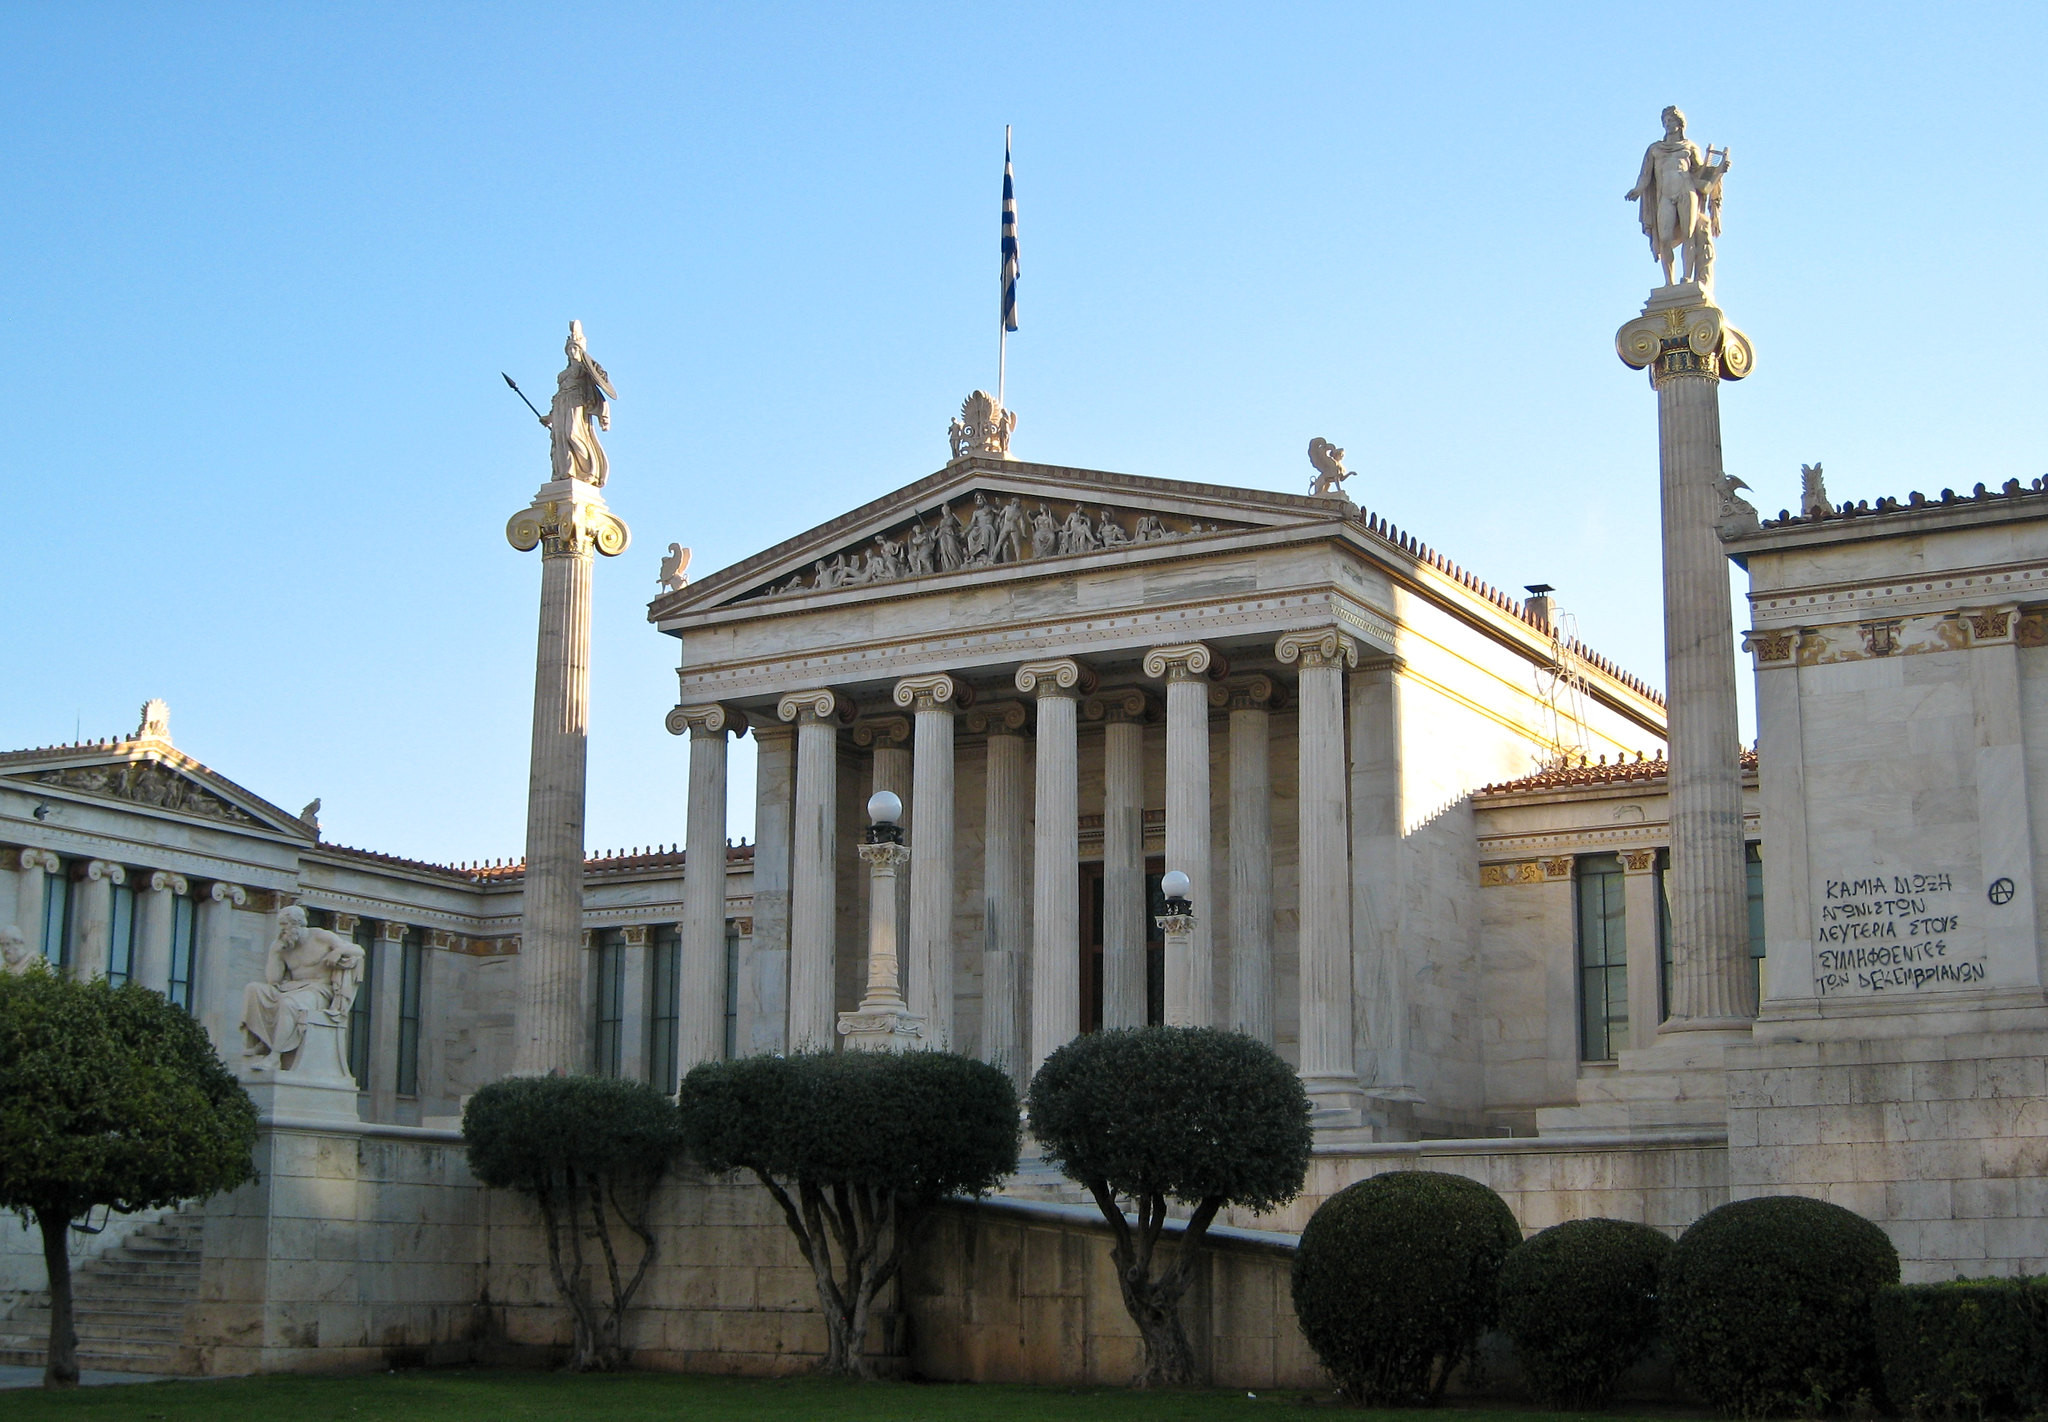 The Academy of Athens by Sharon Mollerus